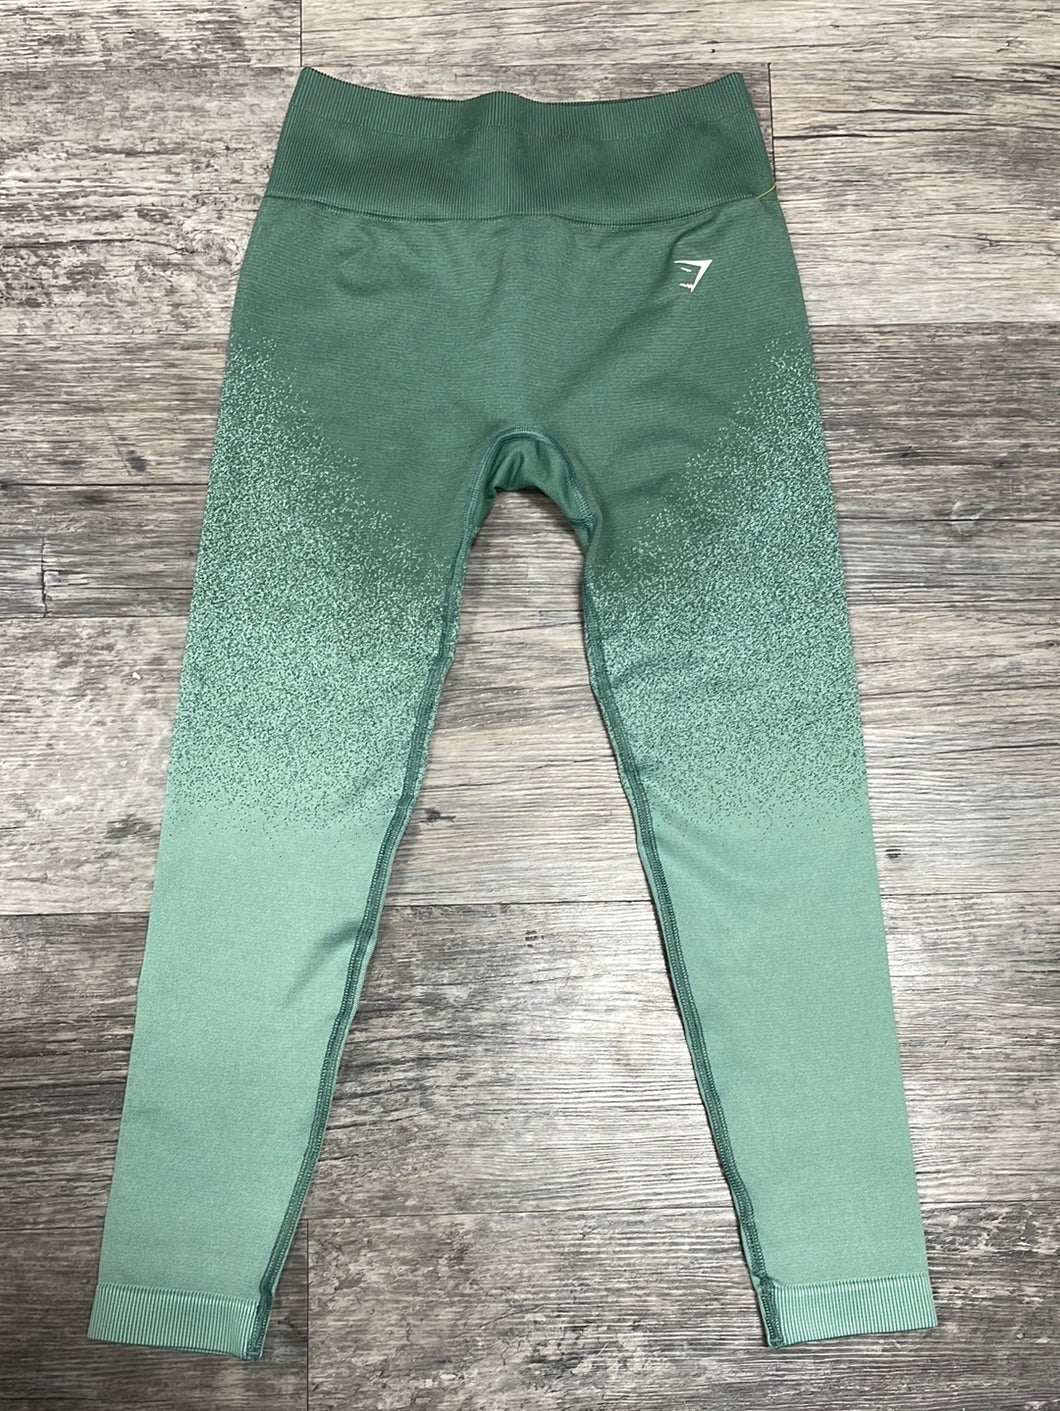 Gymshark Women's Athletic Pants Size Small